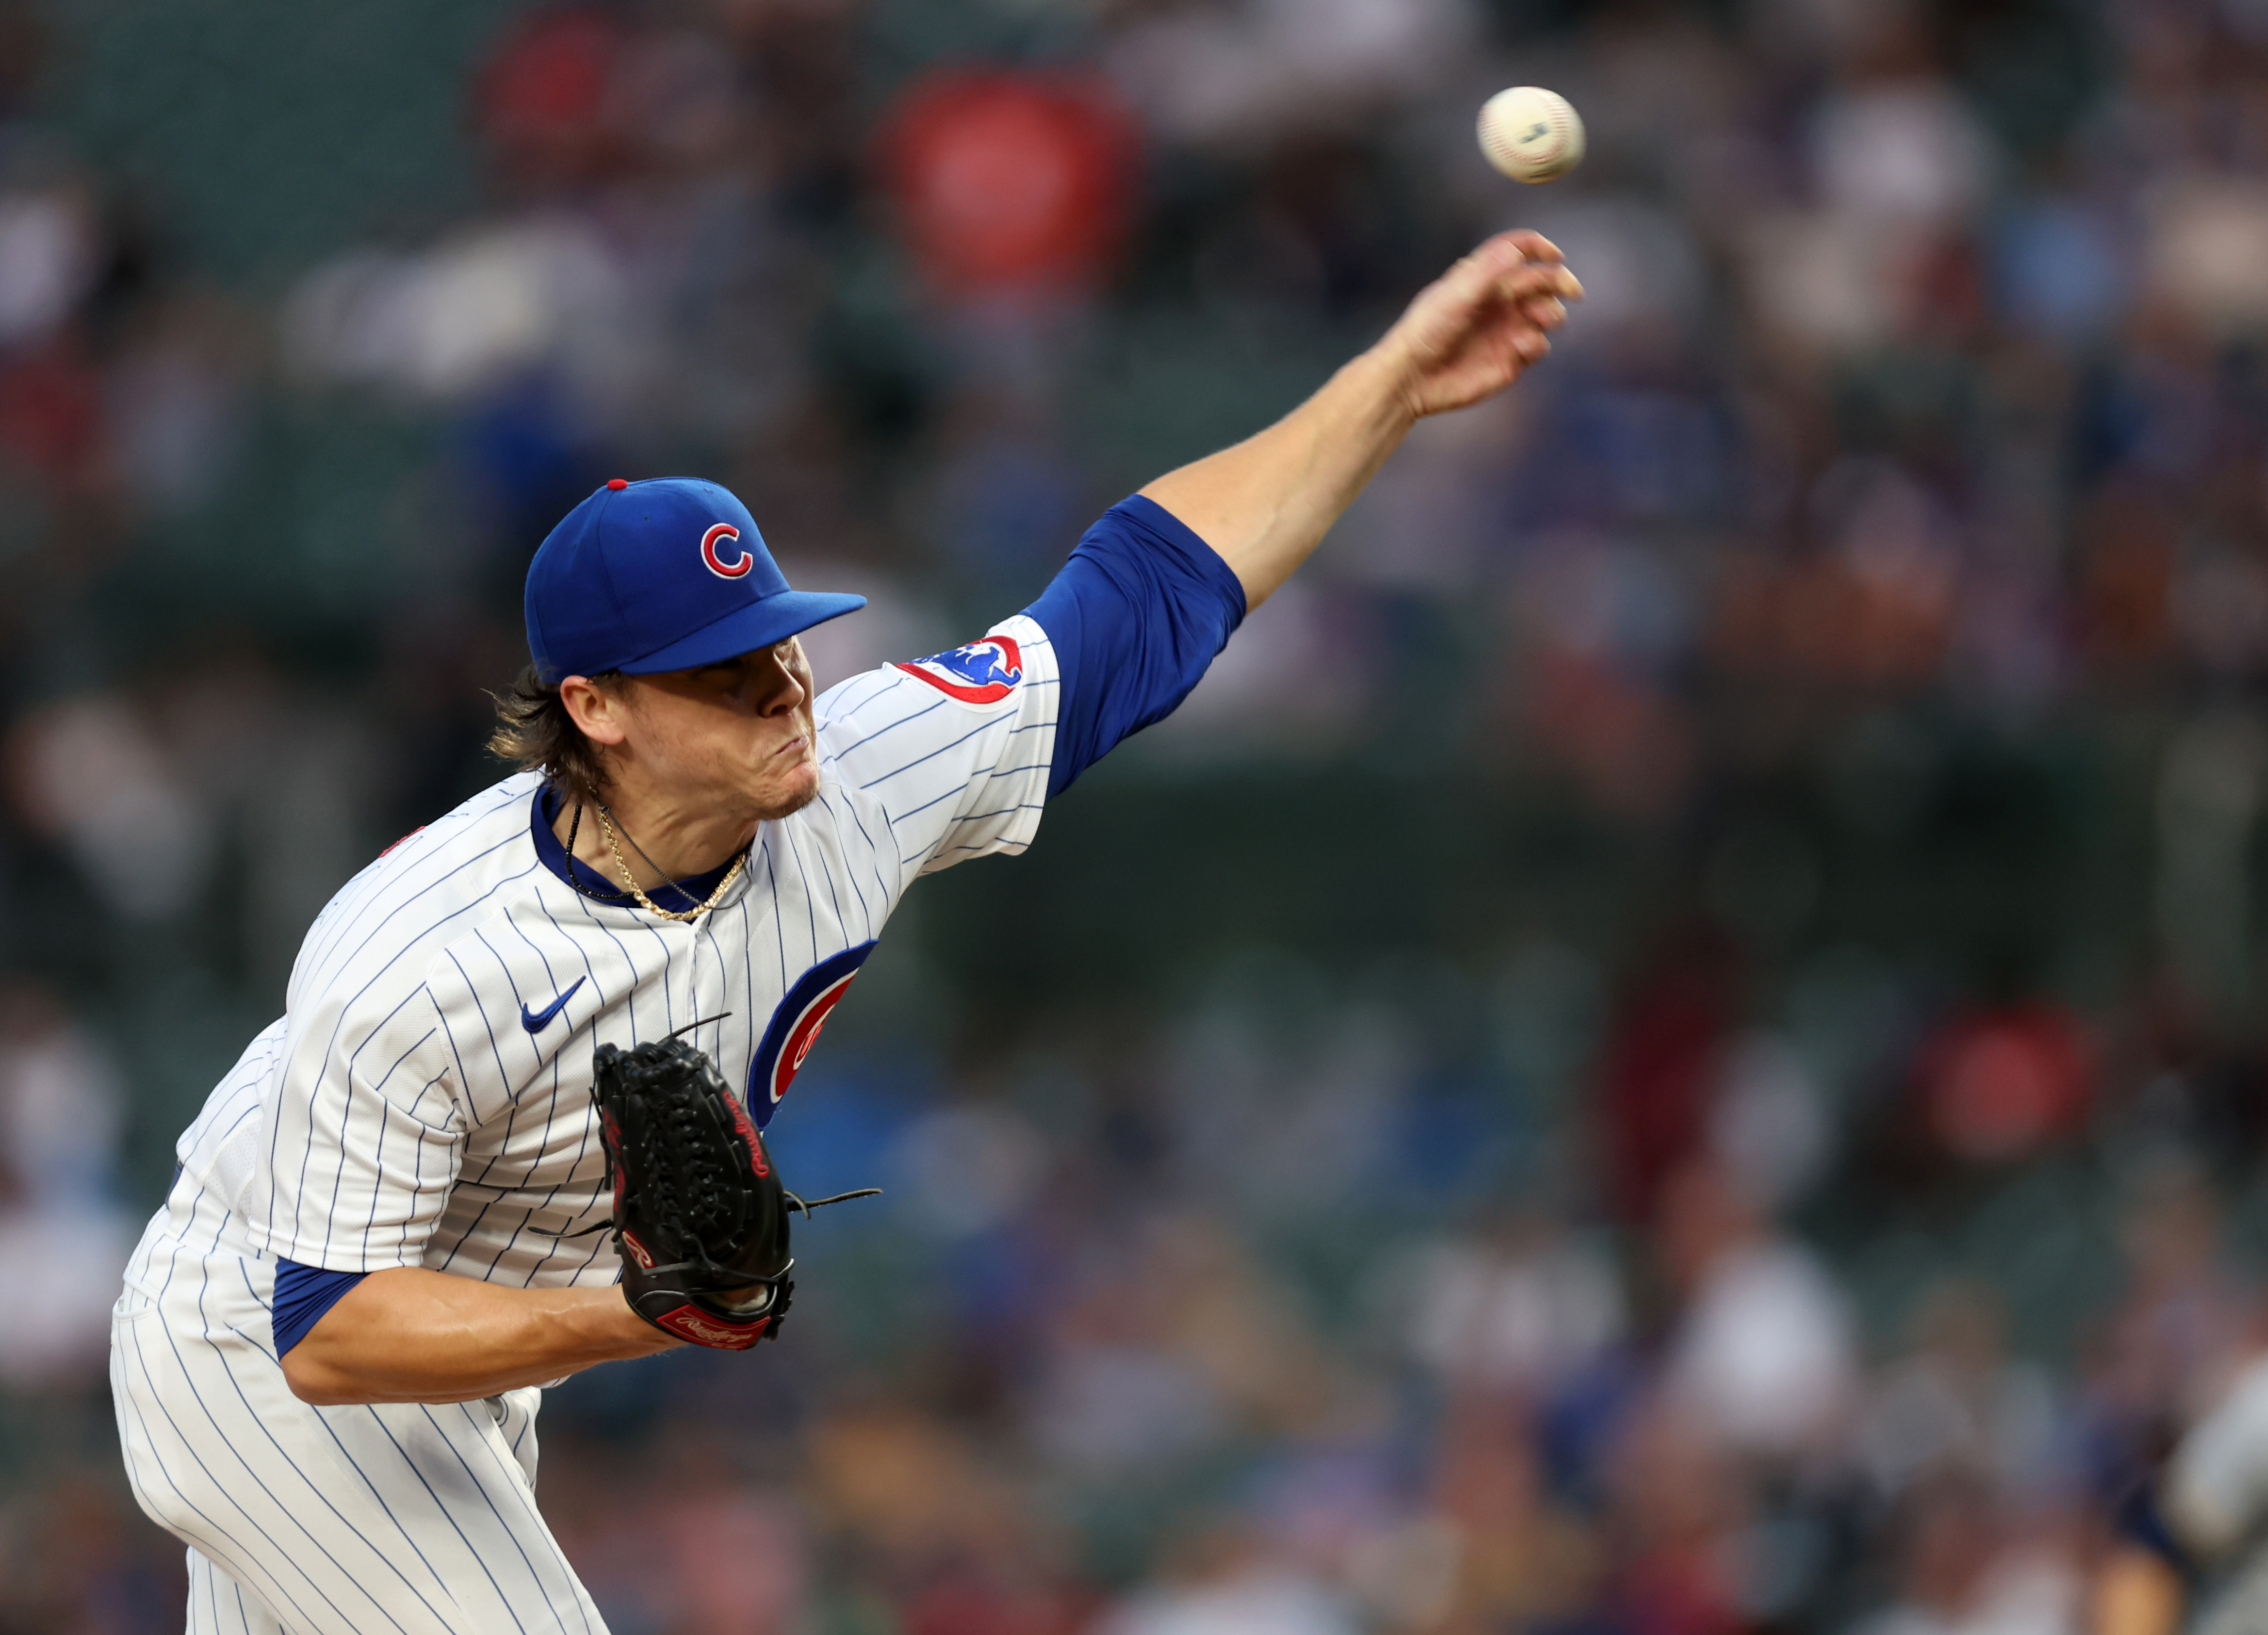 Cubs pitcher Justin Steele looks to continue quality play in Spring